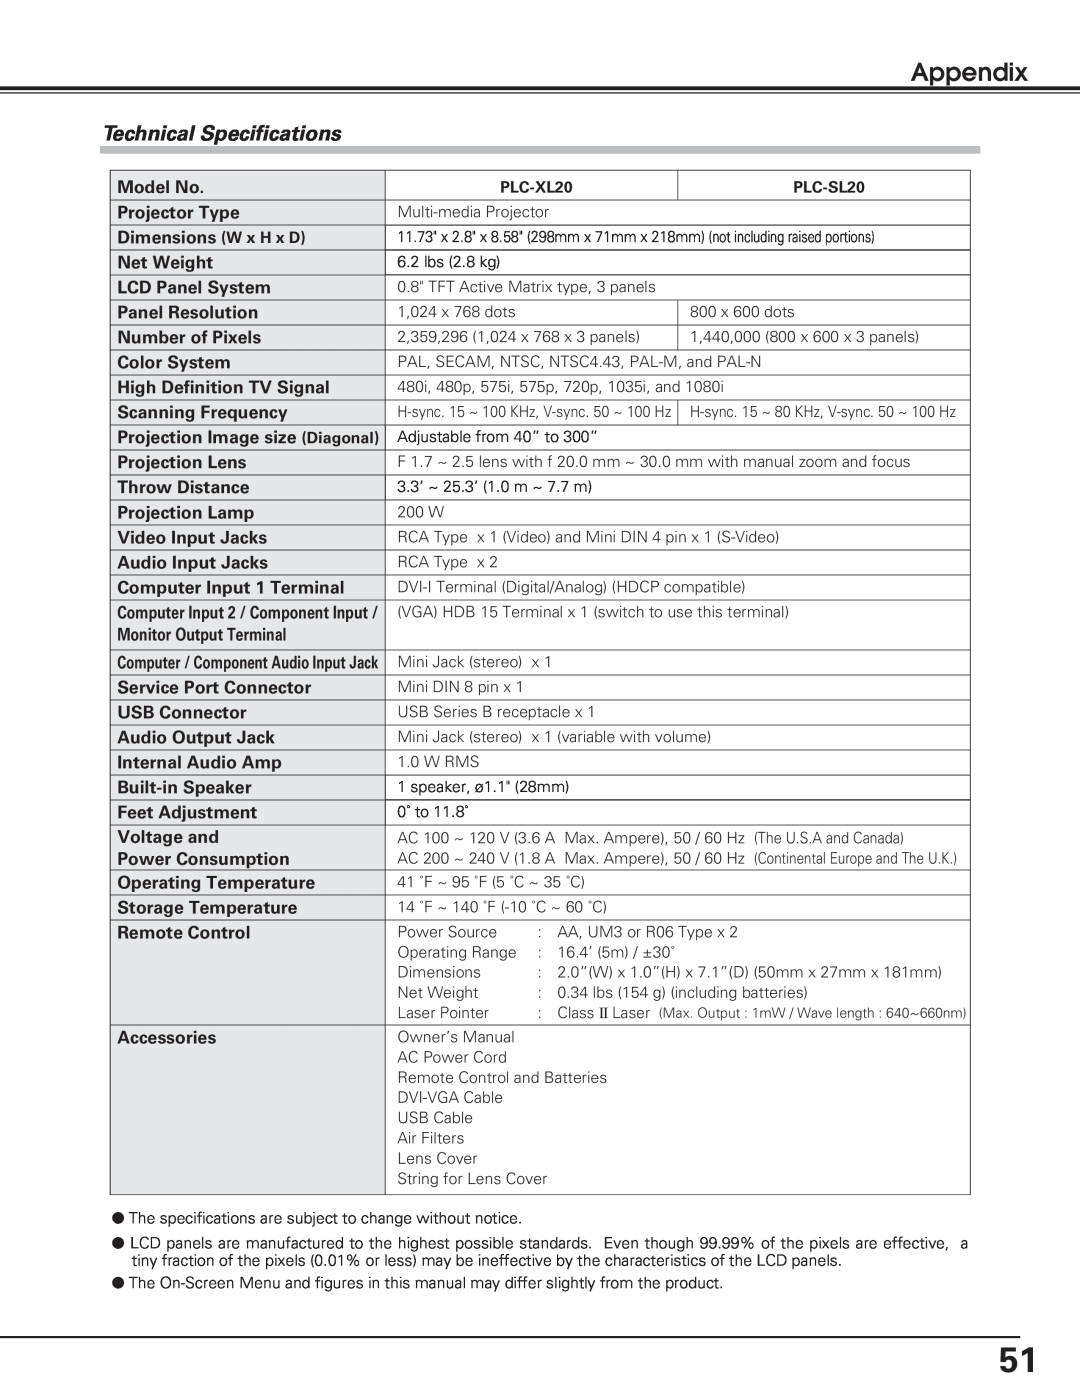 Sanyo PLC-SL20 owner manual Technical Specifications, Appendix 